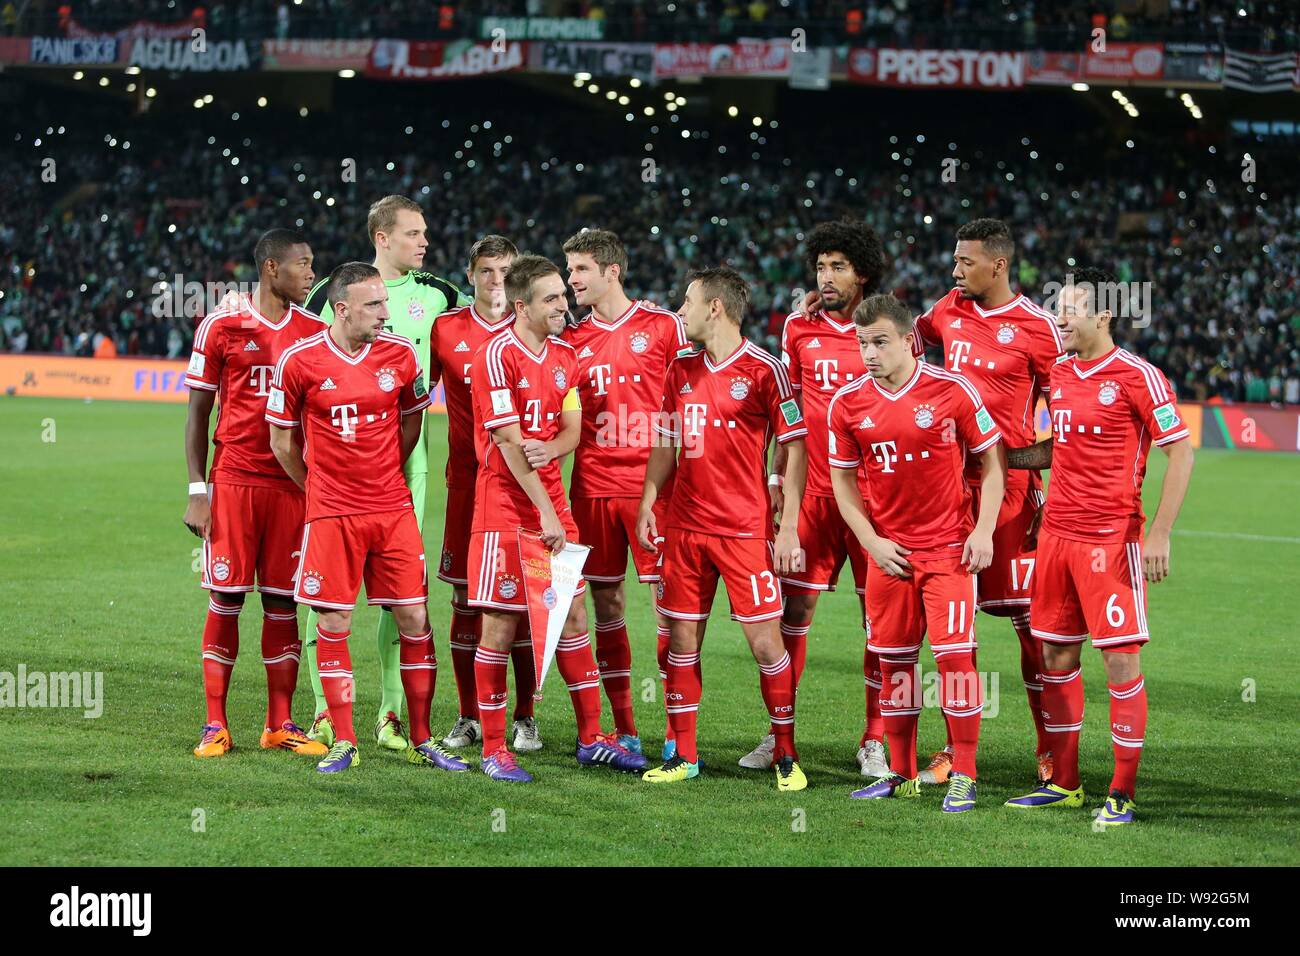 Soccer Players Of Germanys Bayern Munich Are Pictured Before The Final Of The Soccer Club World Cup Between Fc Bayern Munich And Raja Casablanca In Ma Stock Photo Alamy